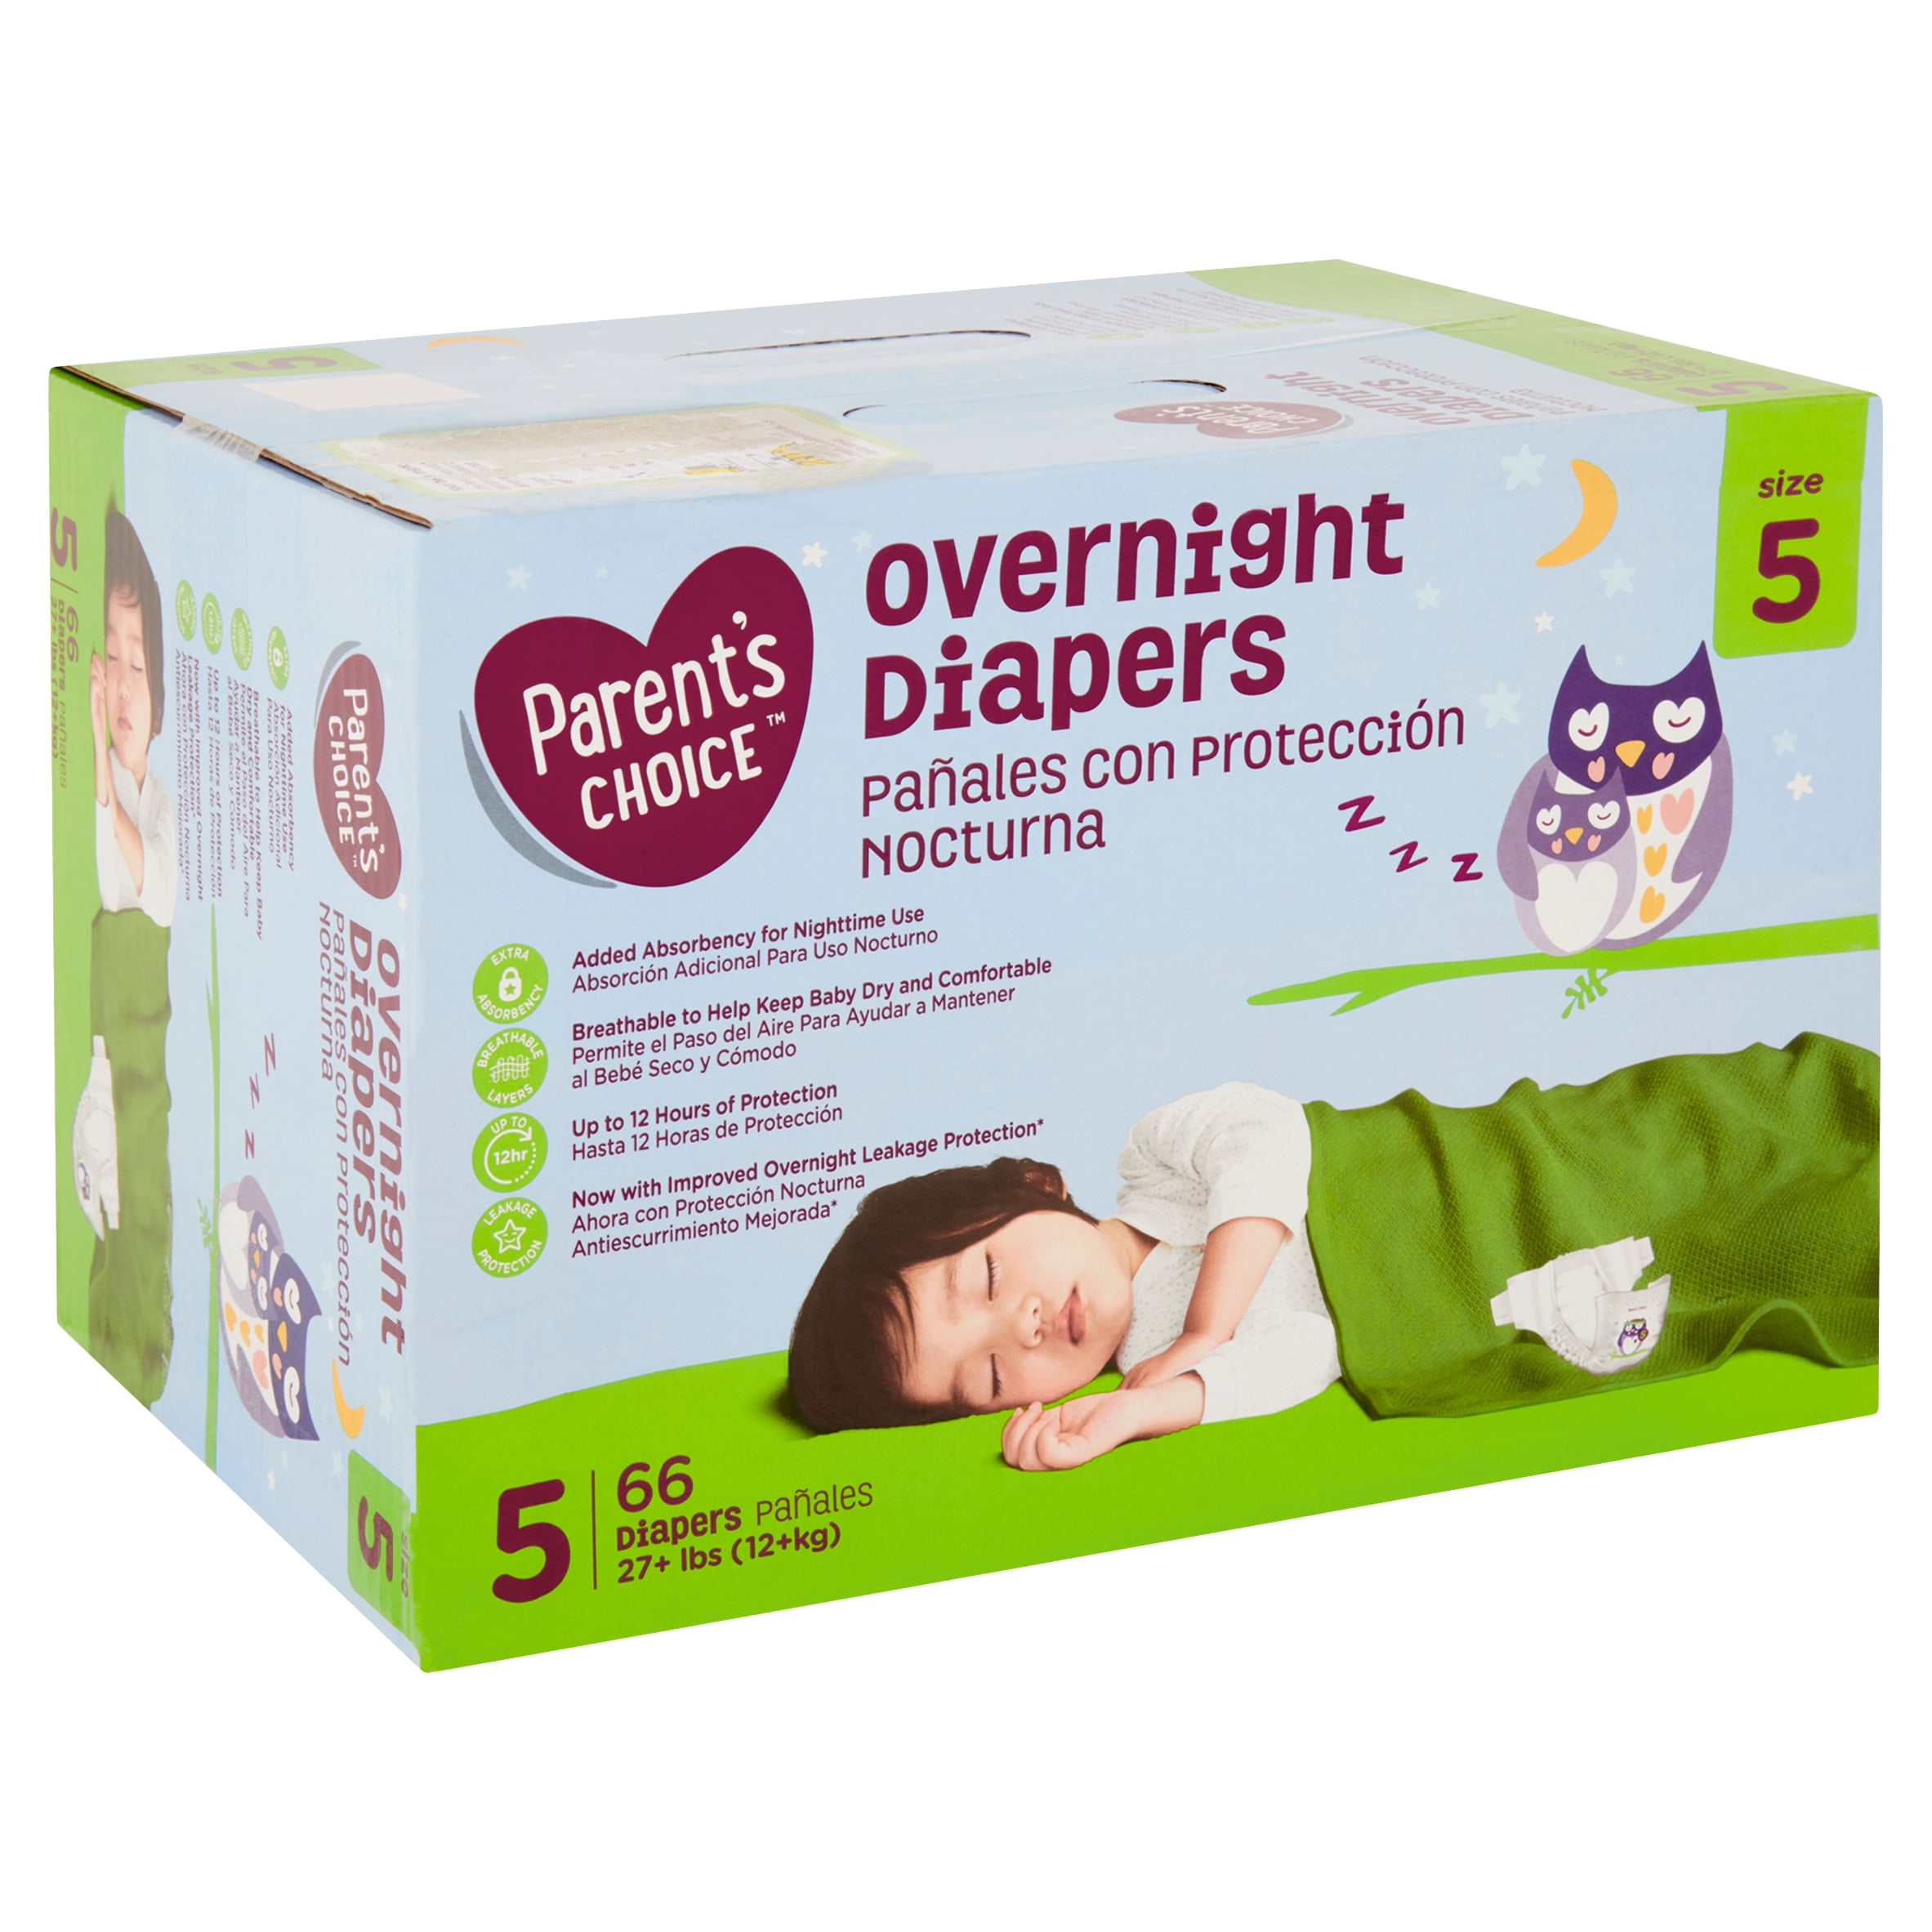 Parent's Choice Overnight Diapers, Size 5, 66 Diapers 